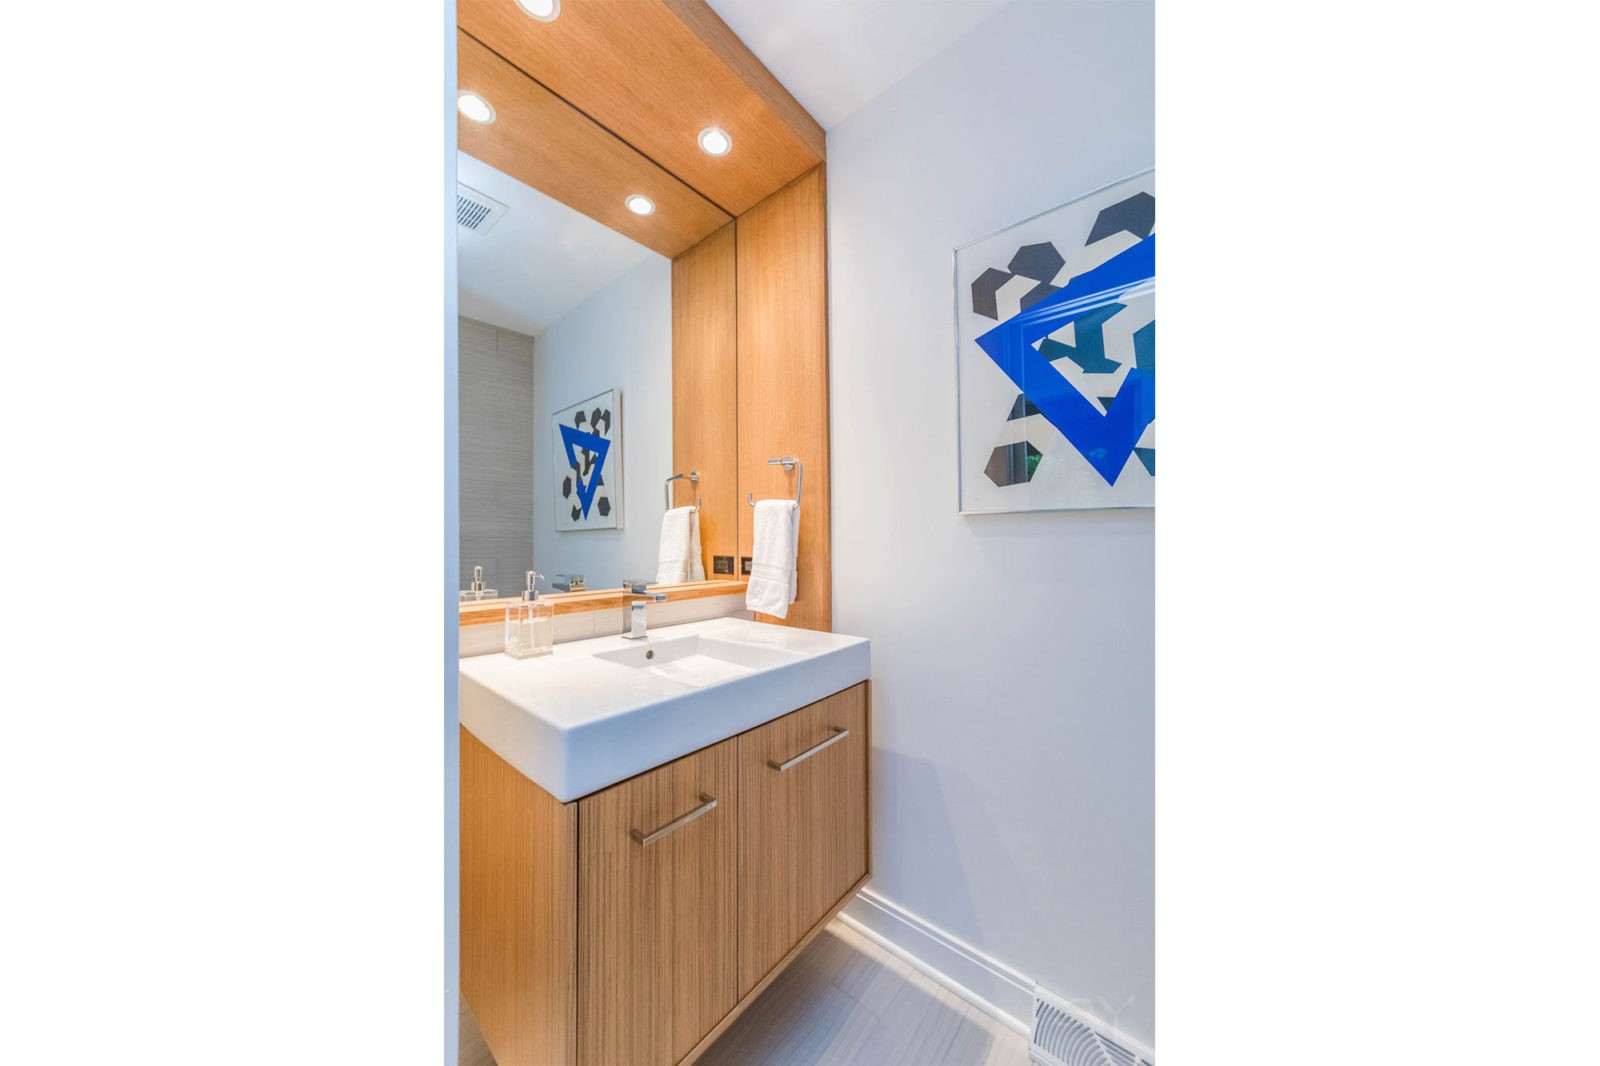 Updated bathroom vanity wrapped in light wood with white marble countertop & royal blue geometric accent art